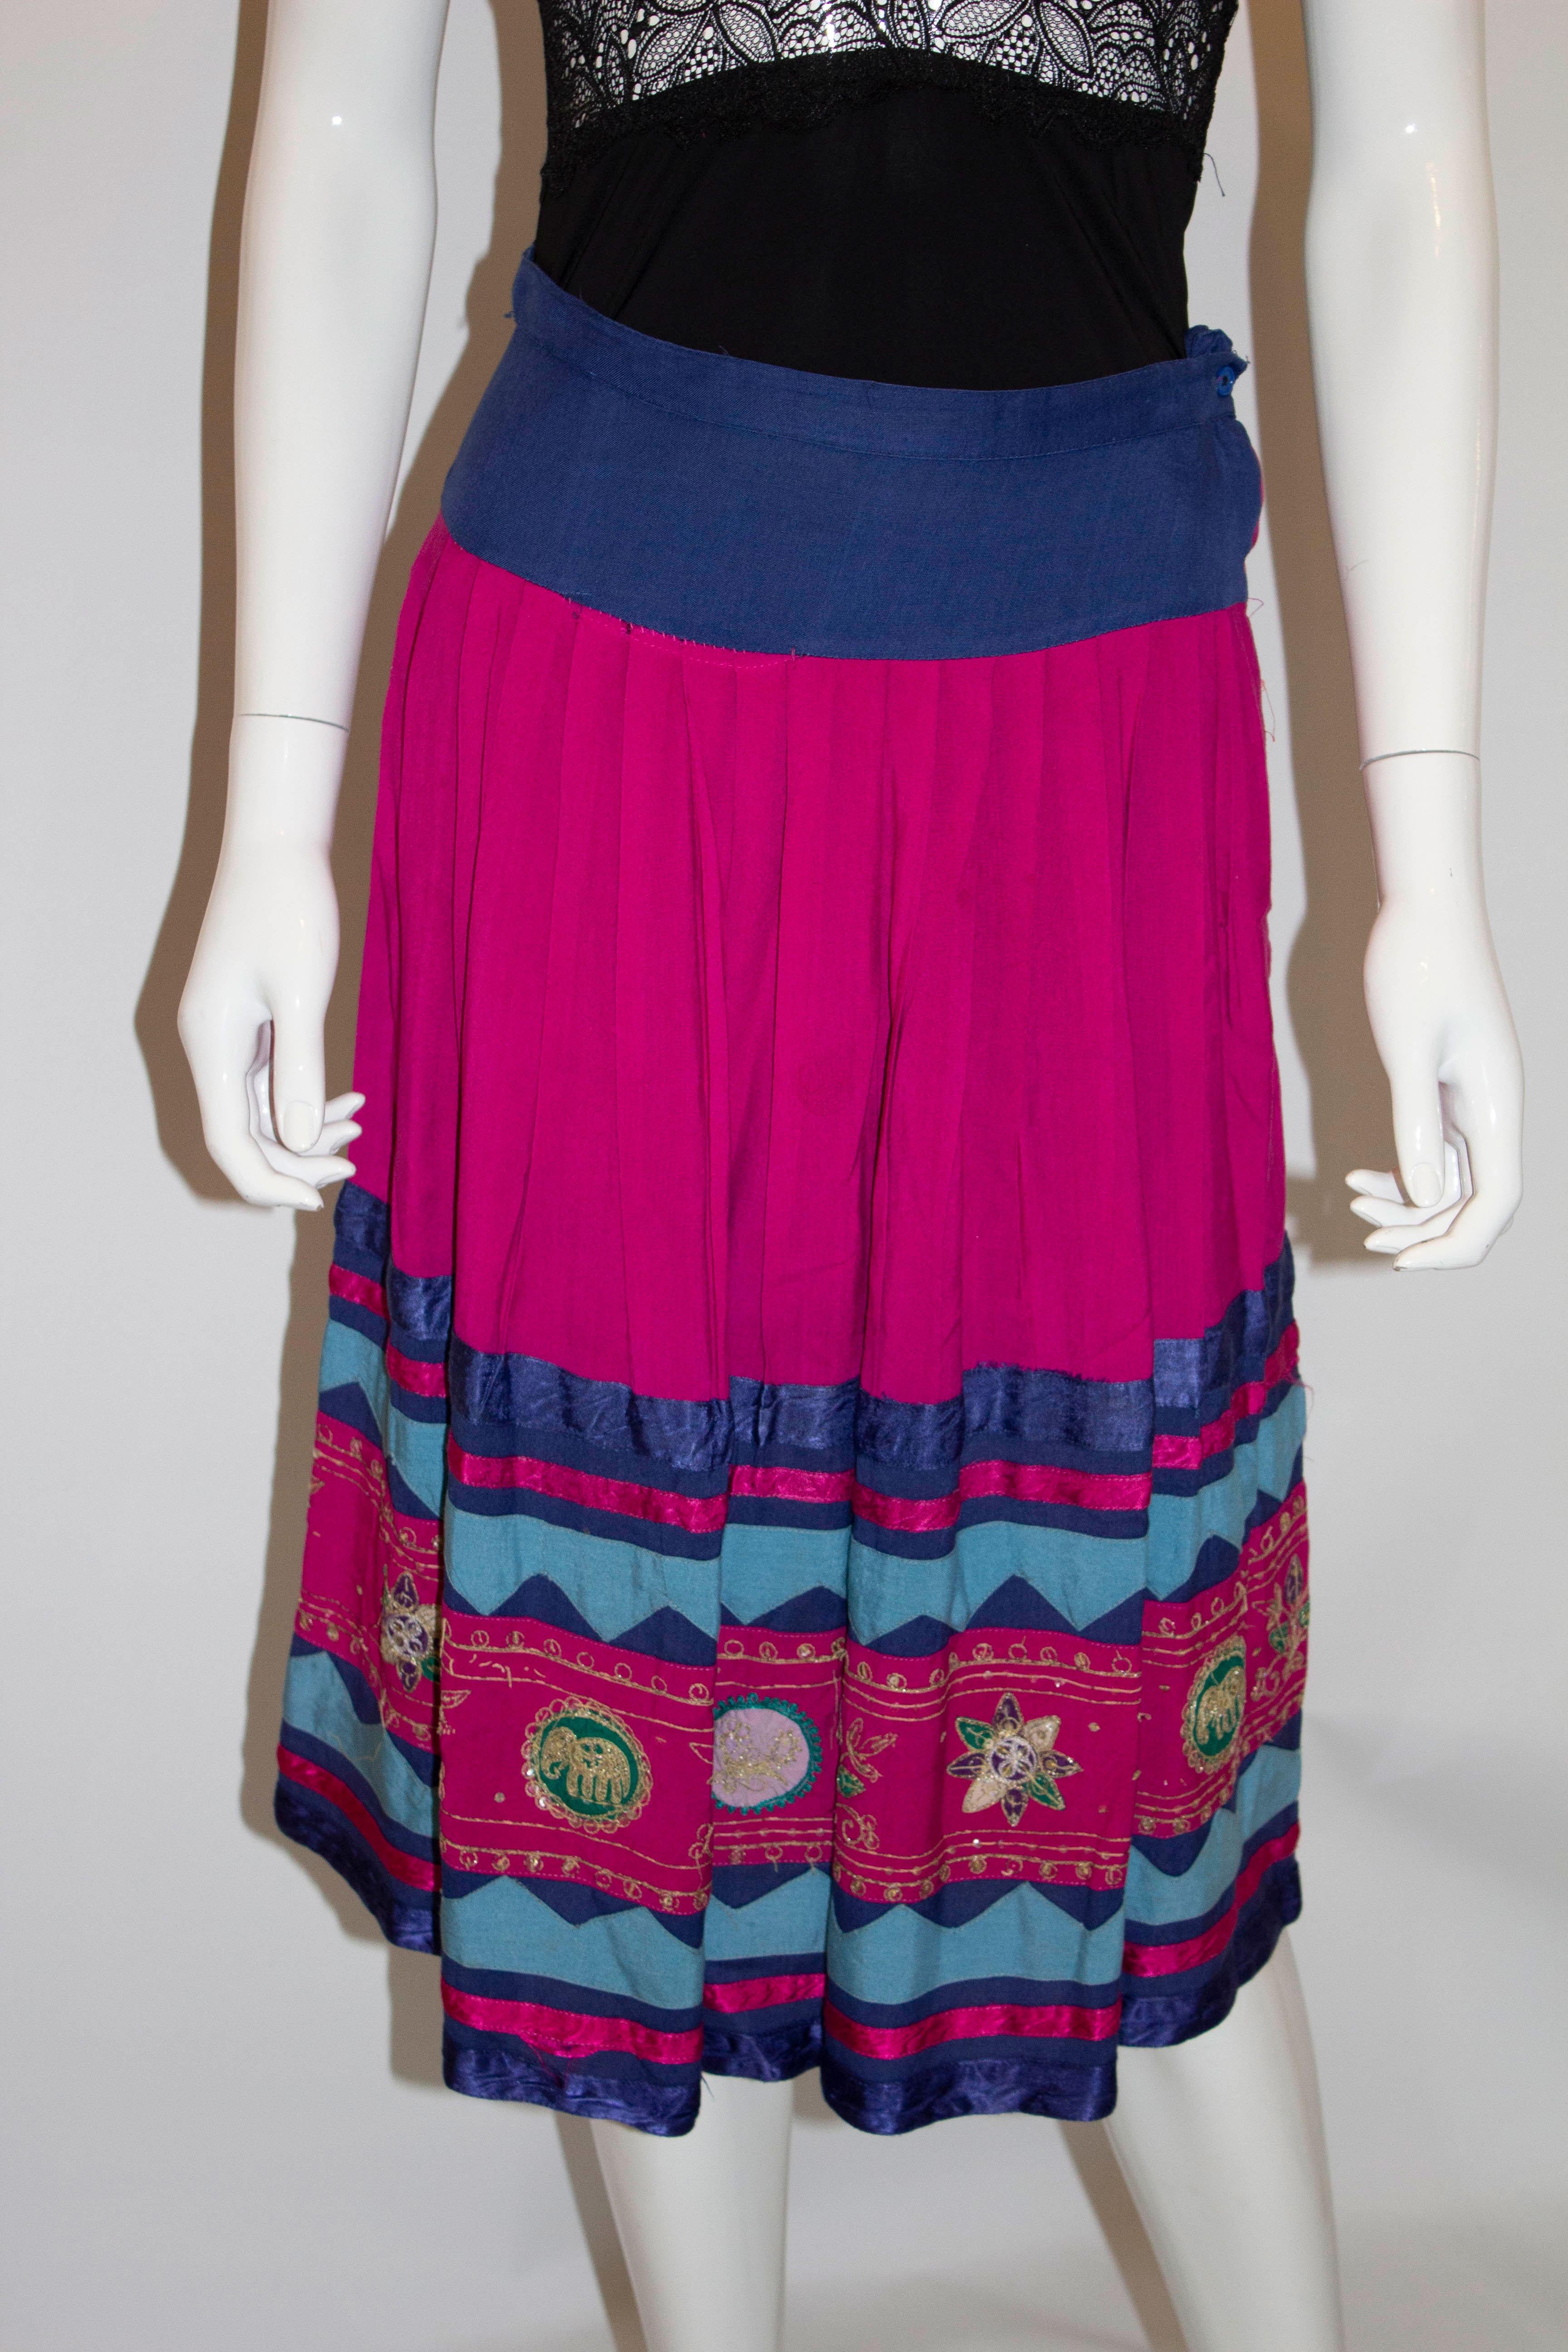 Vintage Ethnic Kobi Skirt  In Good Condition For Sale In London, GB